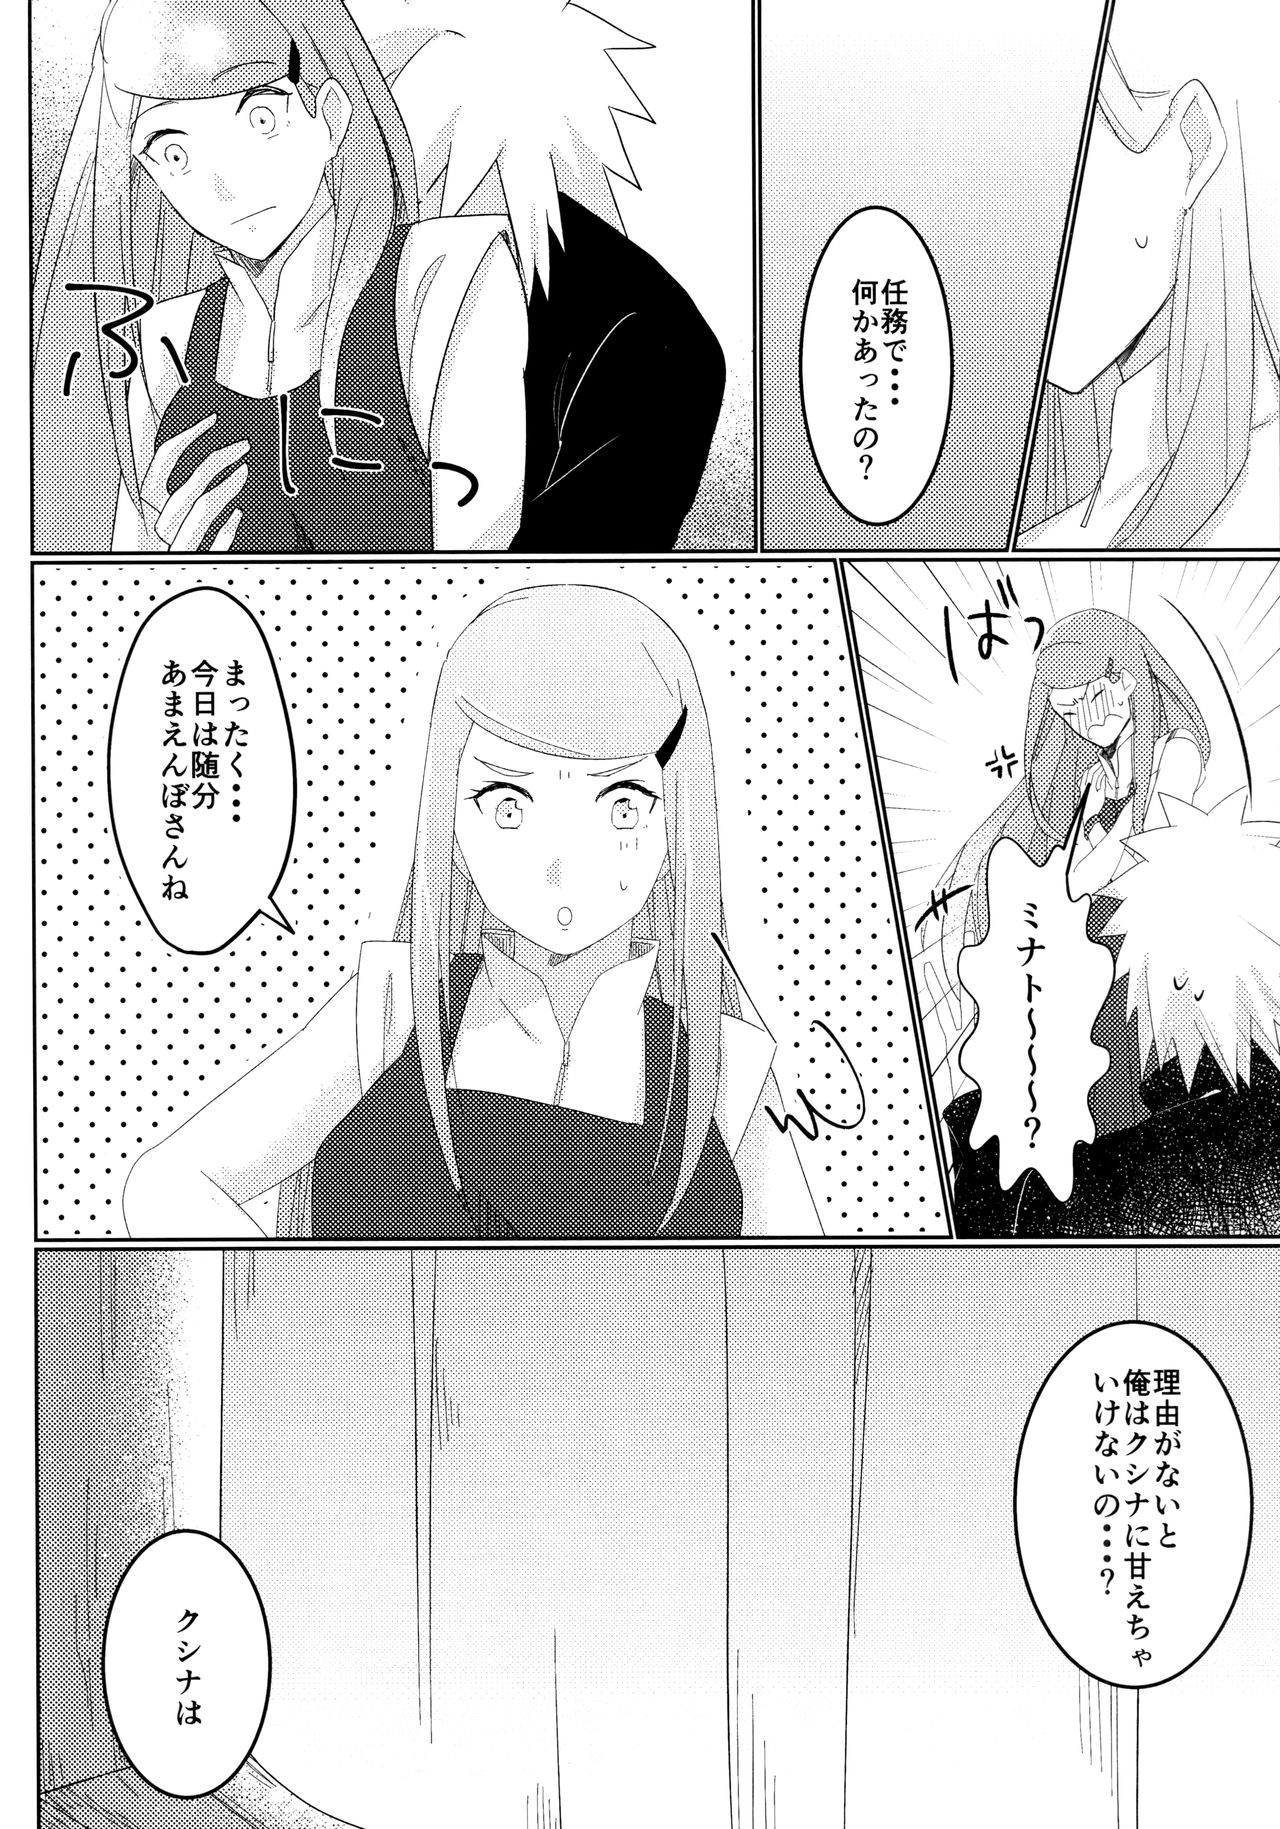 (Zennin Shuuketsu 6) [Fragrant Olive (SIN)] Only You Know (Naruto) page 7 full